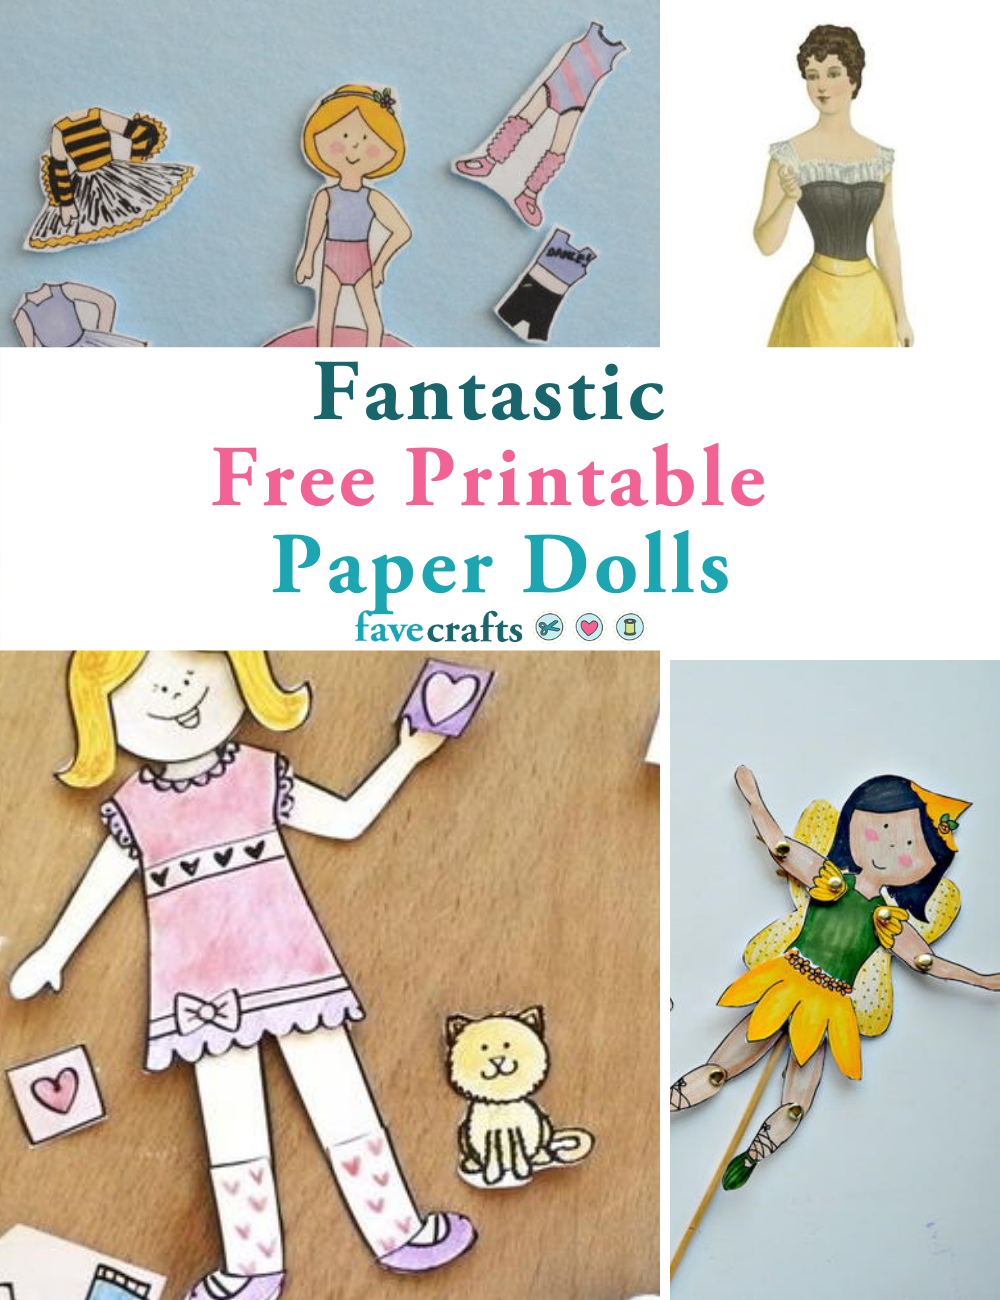 PAPER DOLLS DRAWING WINTER CLOTHES & PLAYING WITH DOLLS DIY FOR